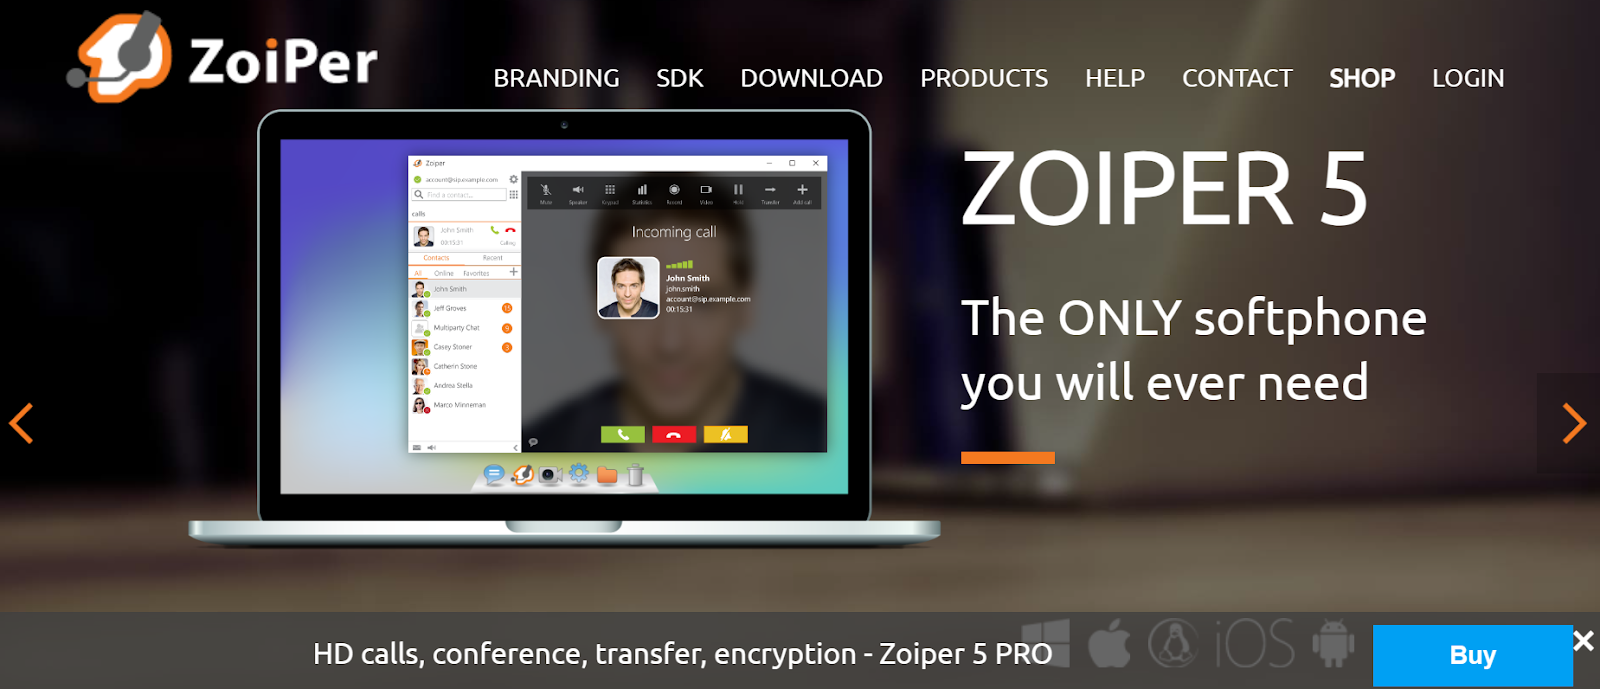 Zoiper website snapshot highlighting the services it offers.